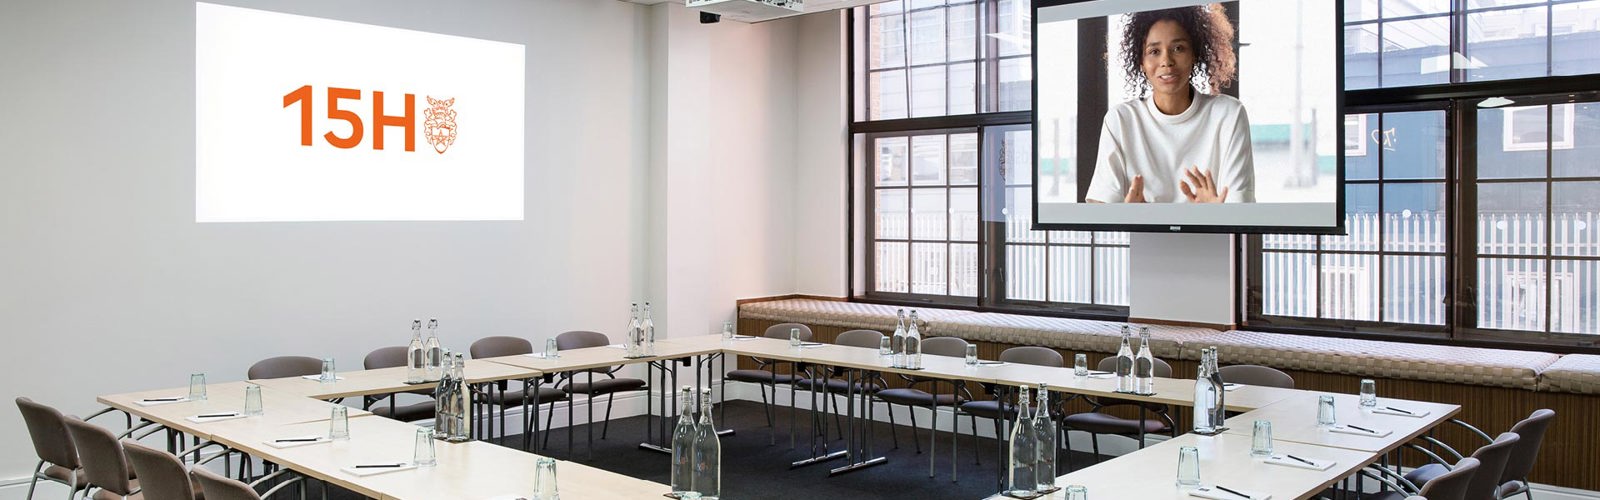 15Hatfields conference room with boardroom-style seating